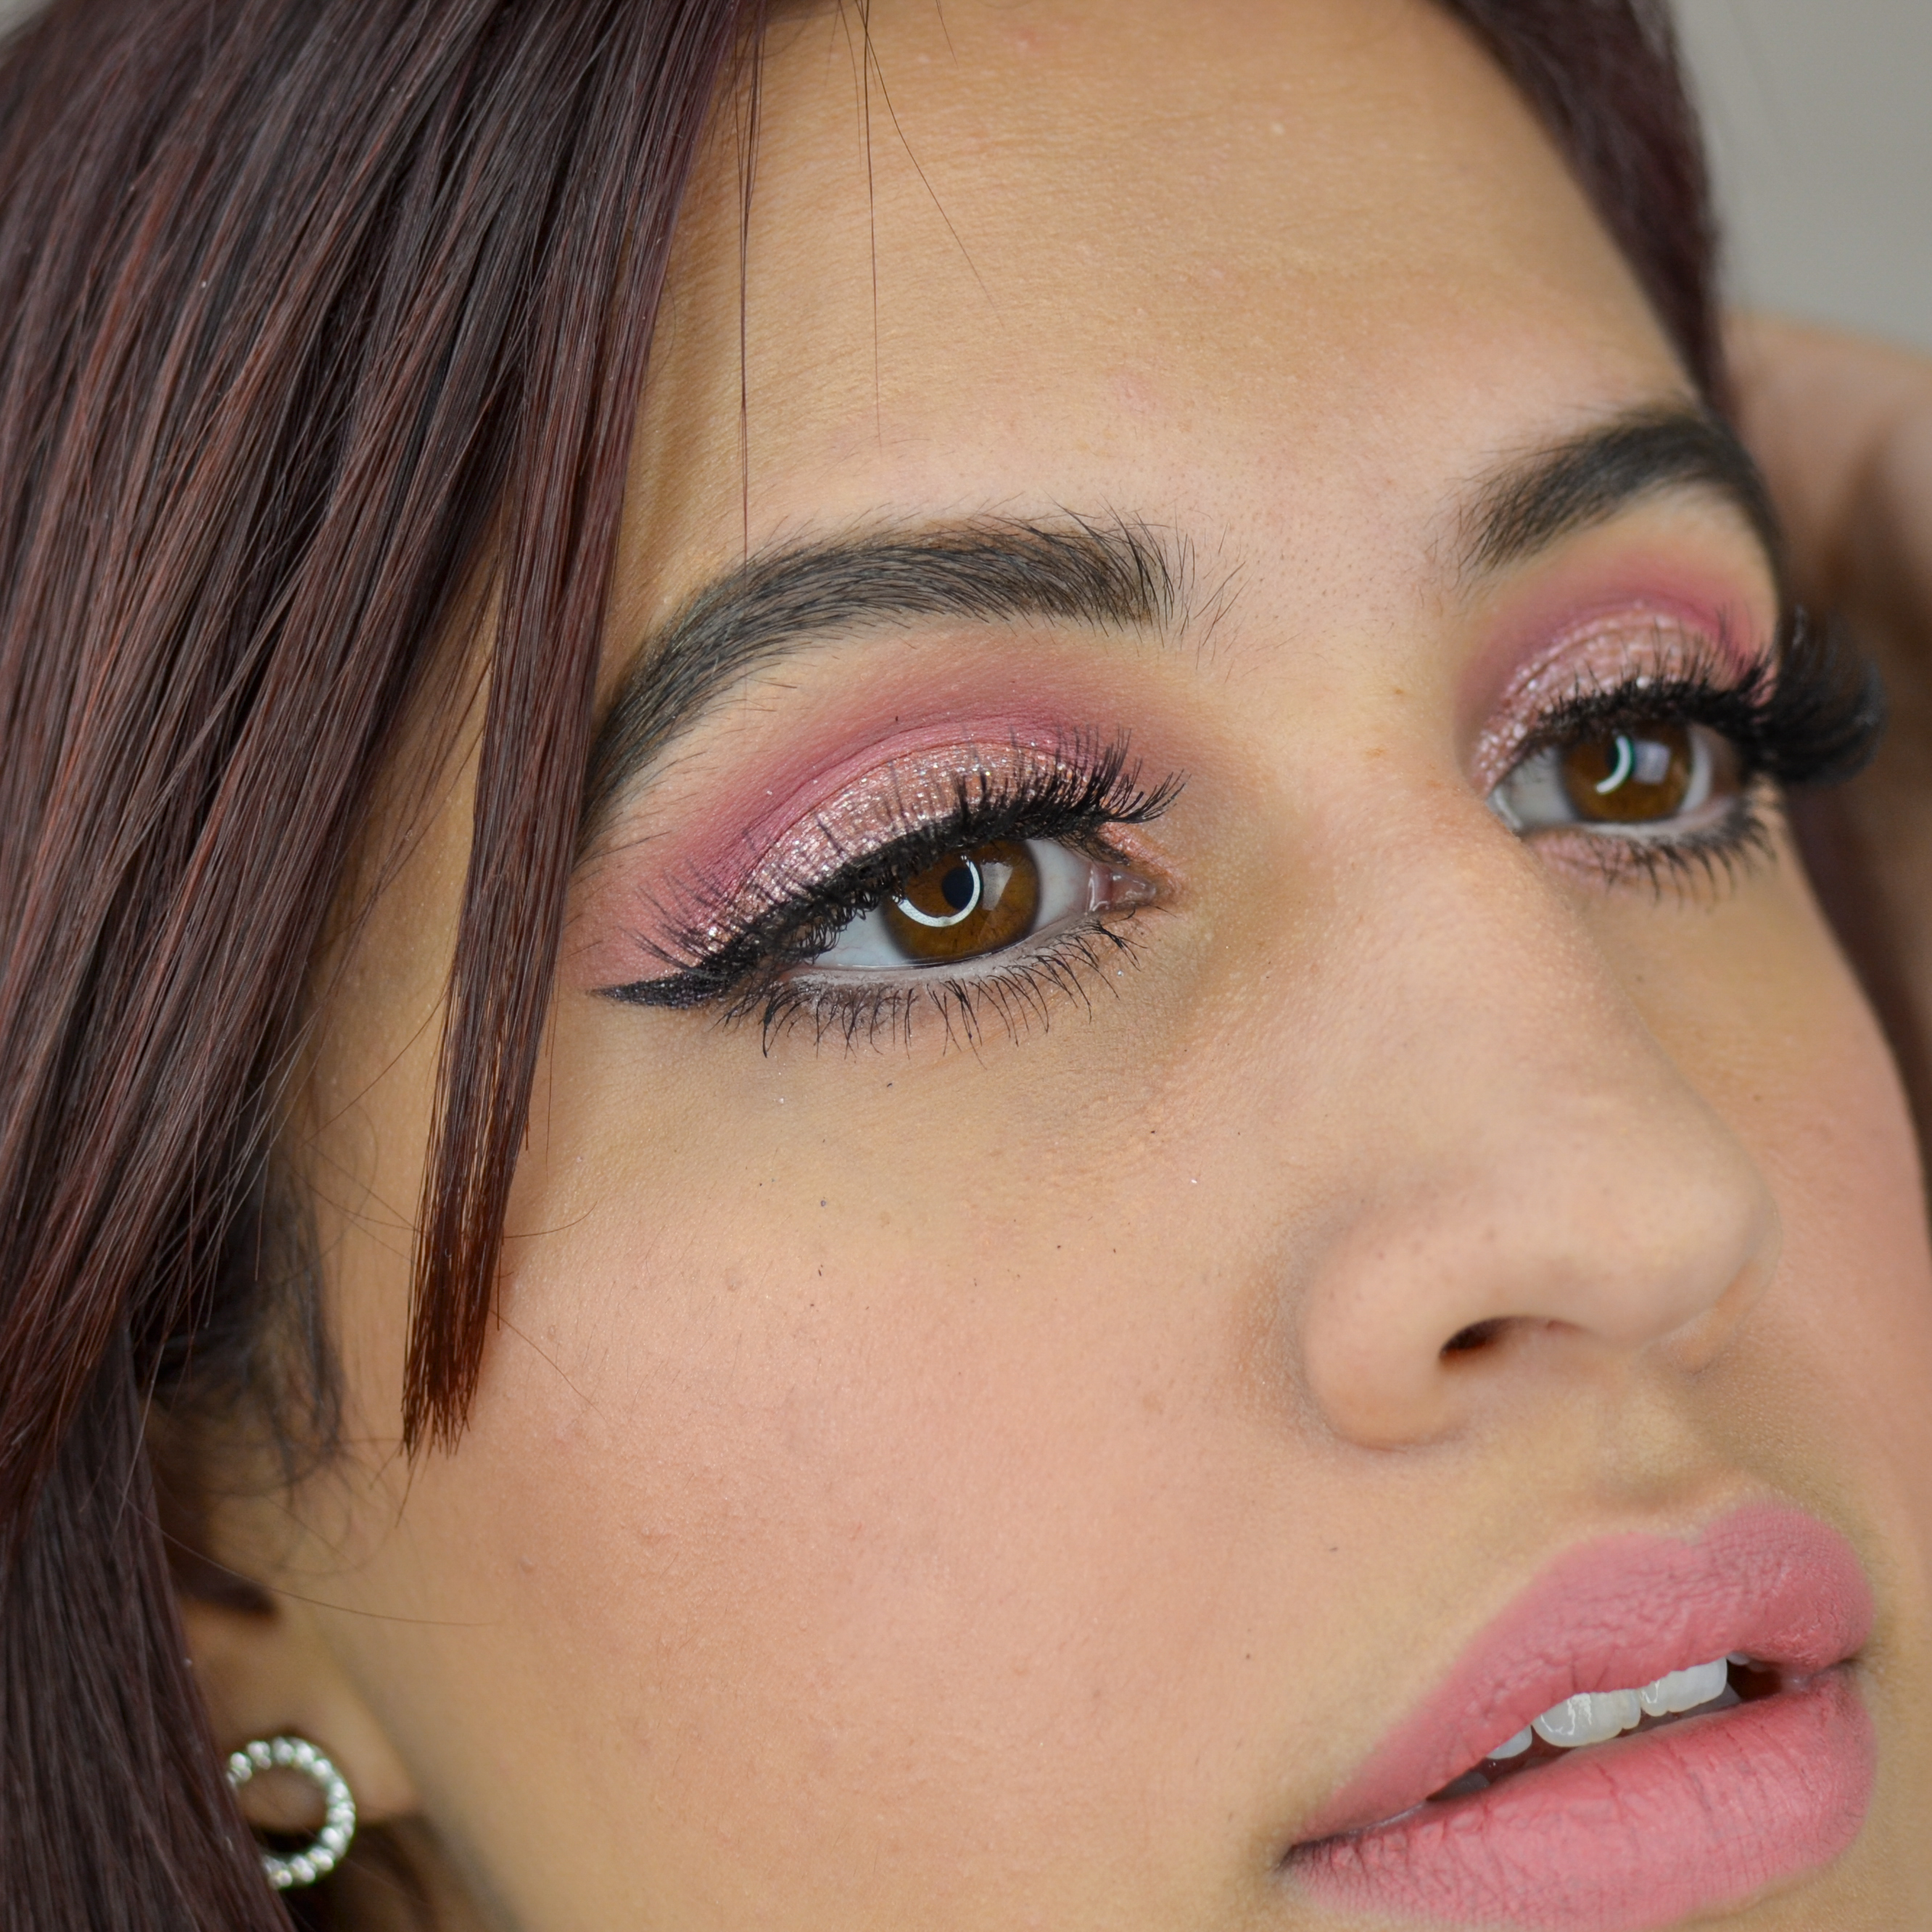 Pink eye makeup for prom, pink dress, or birthday. It is a simple pink eyeshadow look.